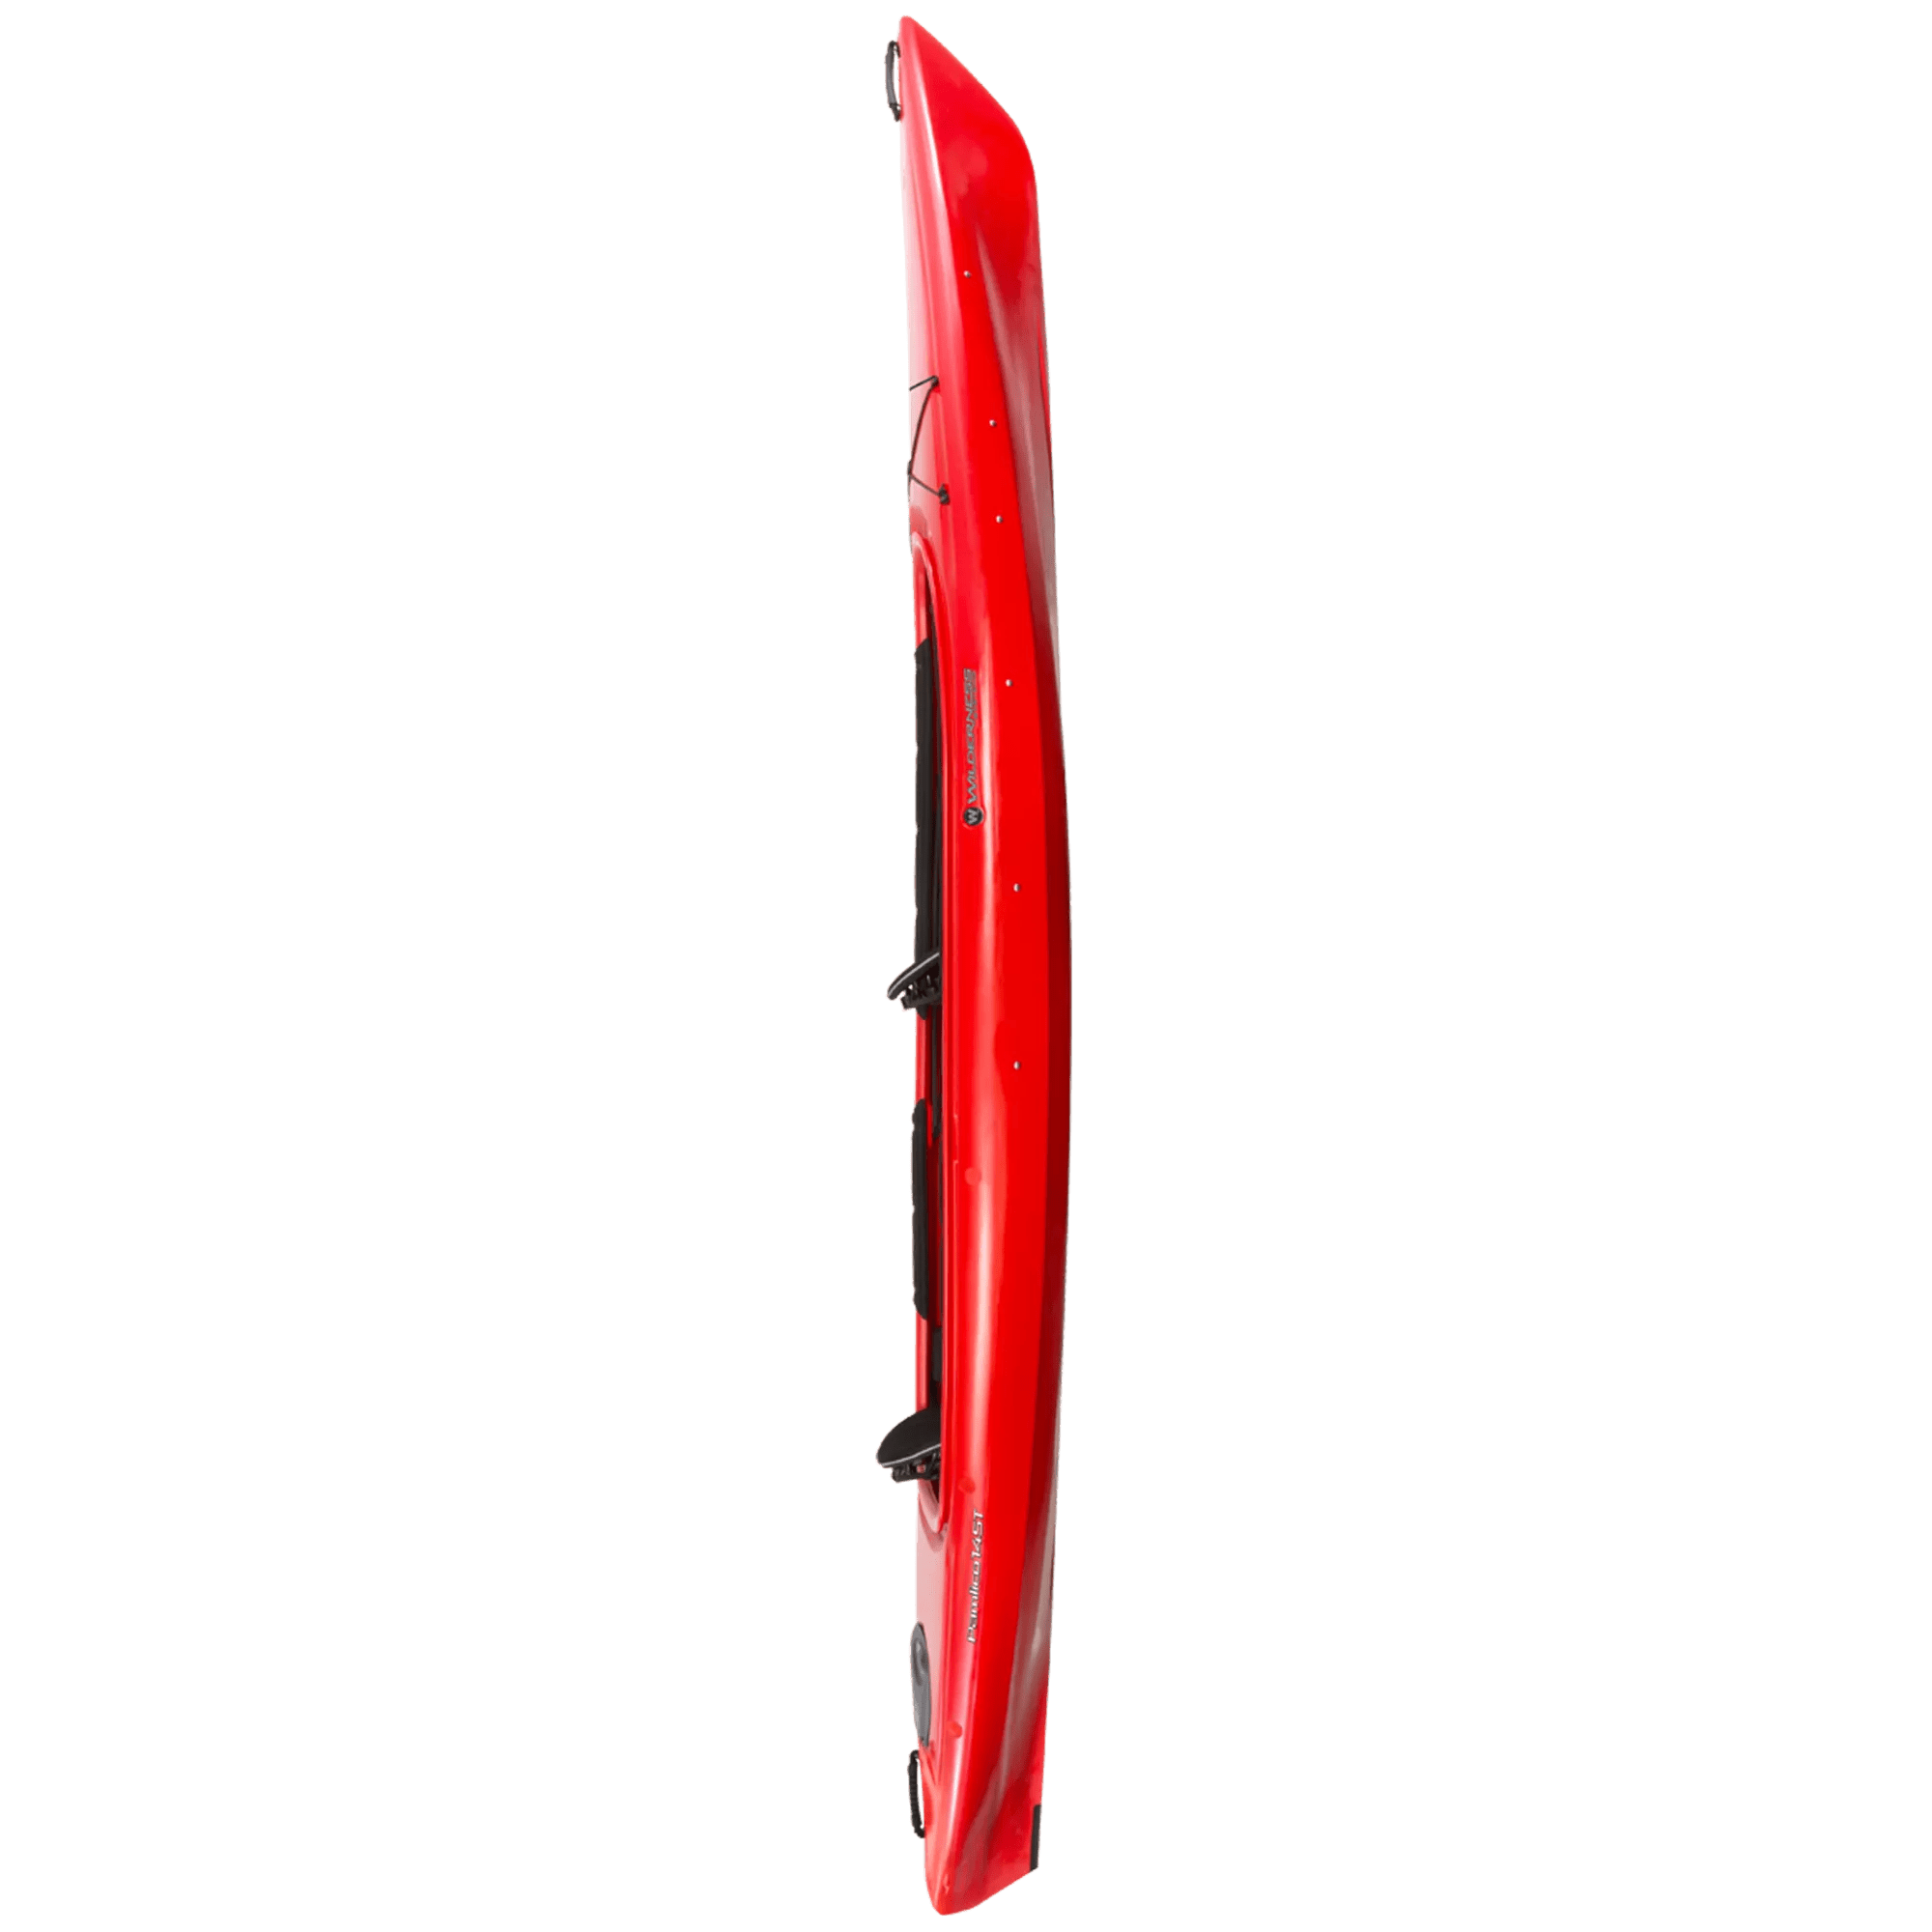 WILDERNESS SYSTEMS - Pamlico 145T Recreational Kayak - Red - 9730455040 - SIDE